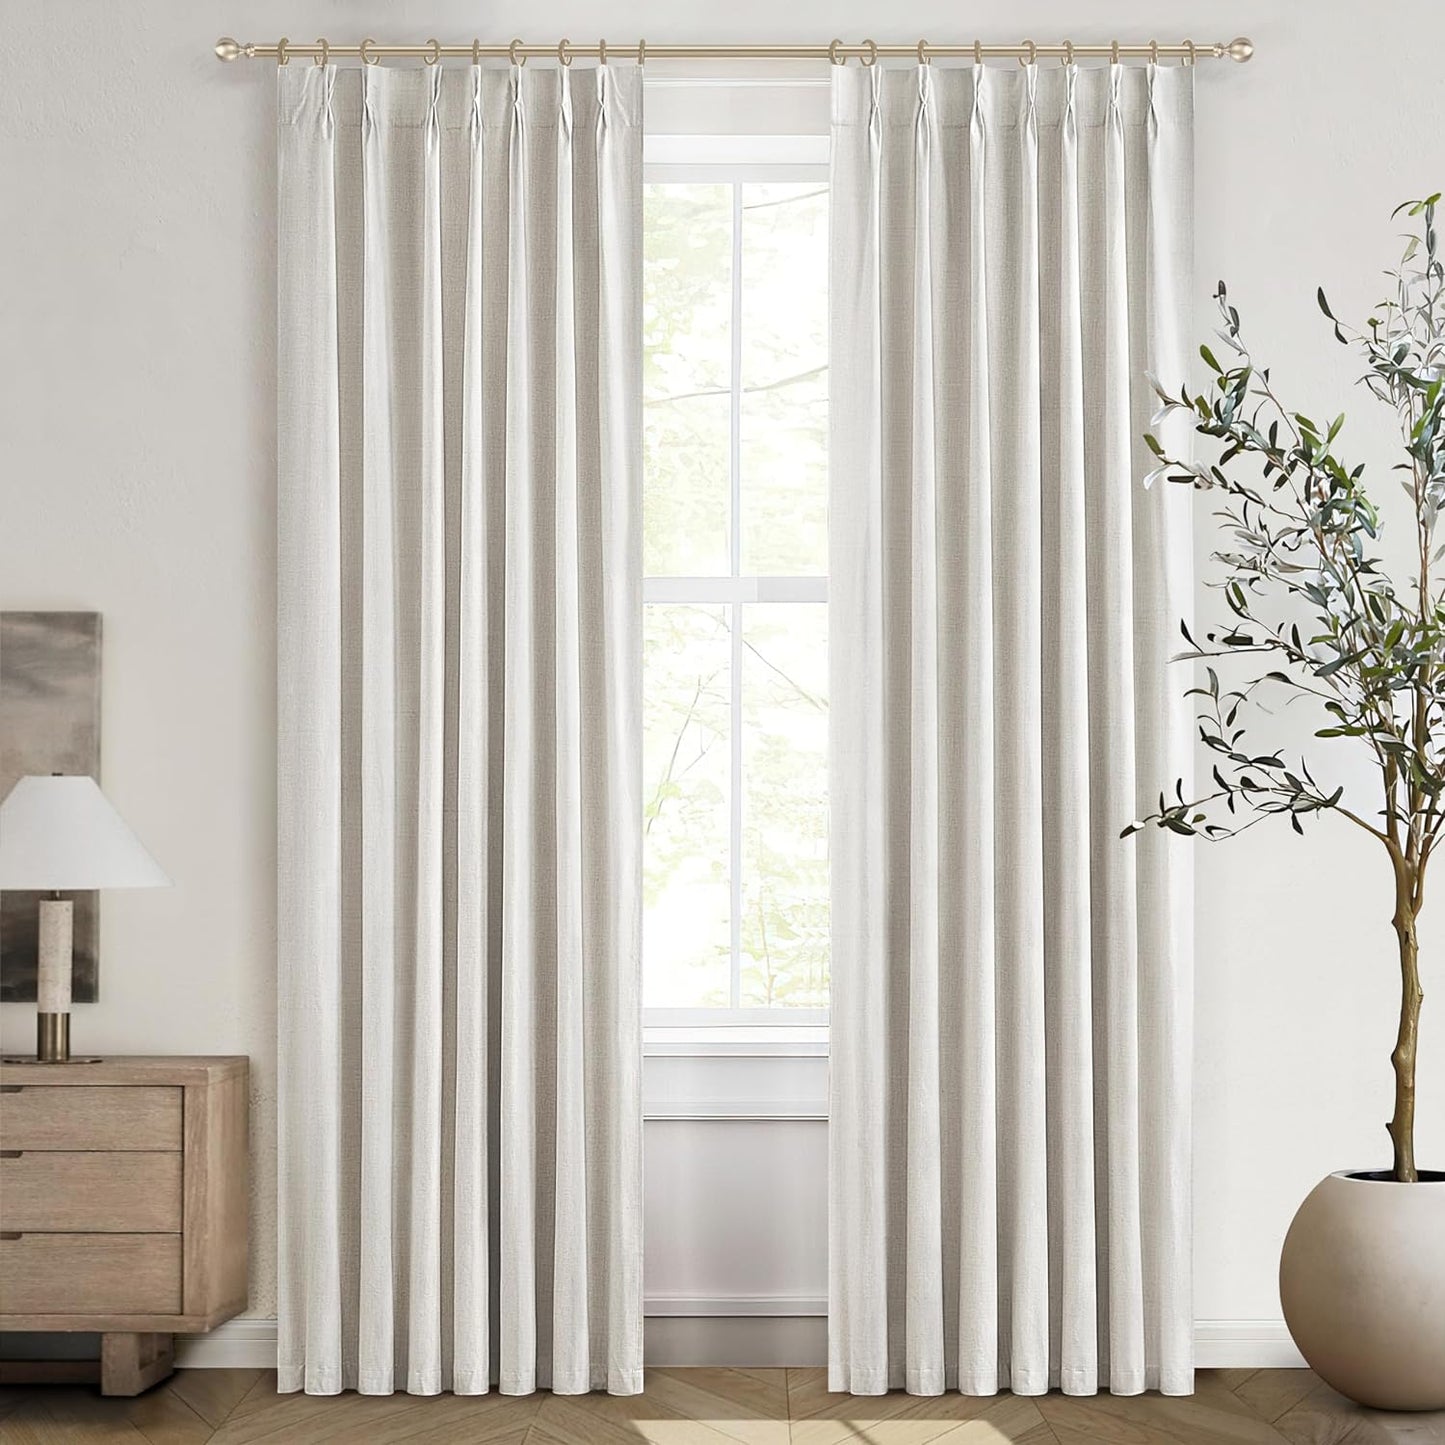 Natural Linen Pinch Pleated Blackout Curtains & Drapes 96 Inch Long Bedroom/Livingroom Farmhouse Curtains 2 Panel Sets, Neutral Track Room Darkening Thermal Insulated 8Ft Back Tab Window Curtain  QJmydeco Birch 40"W X 63"L X 2 Panels 